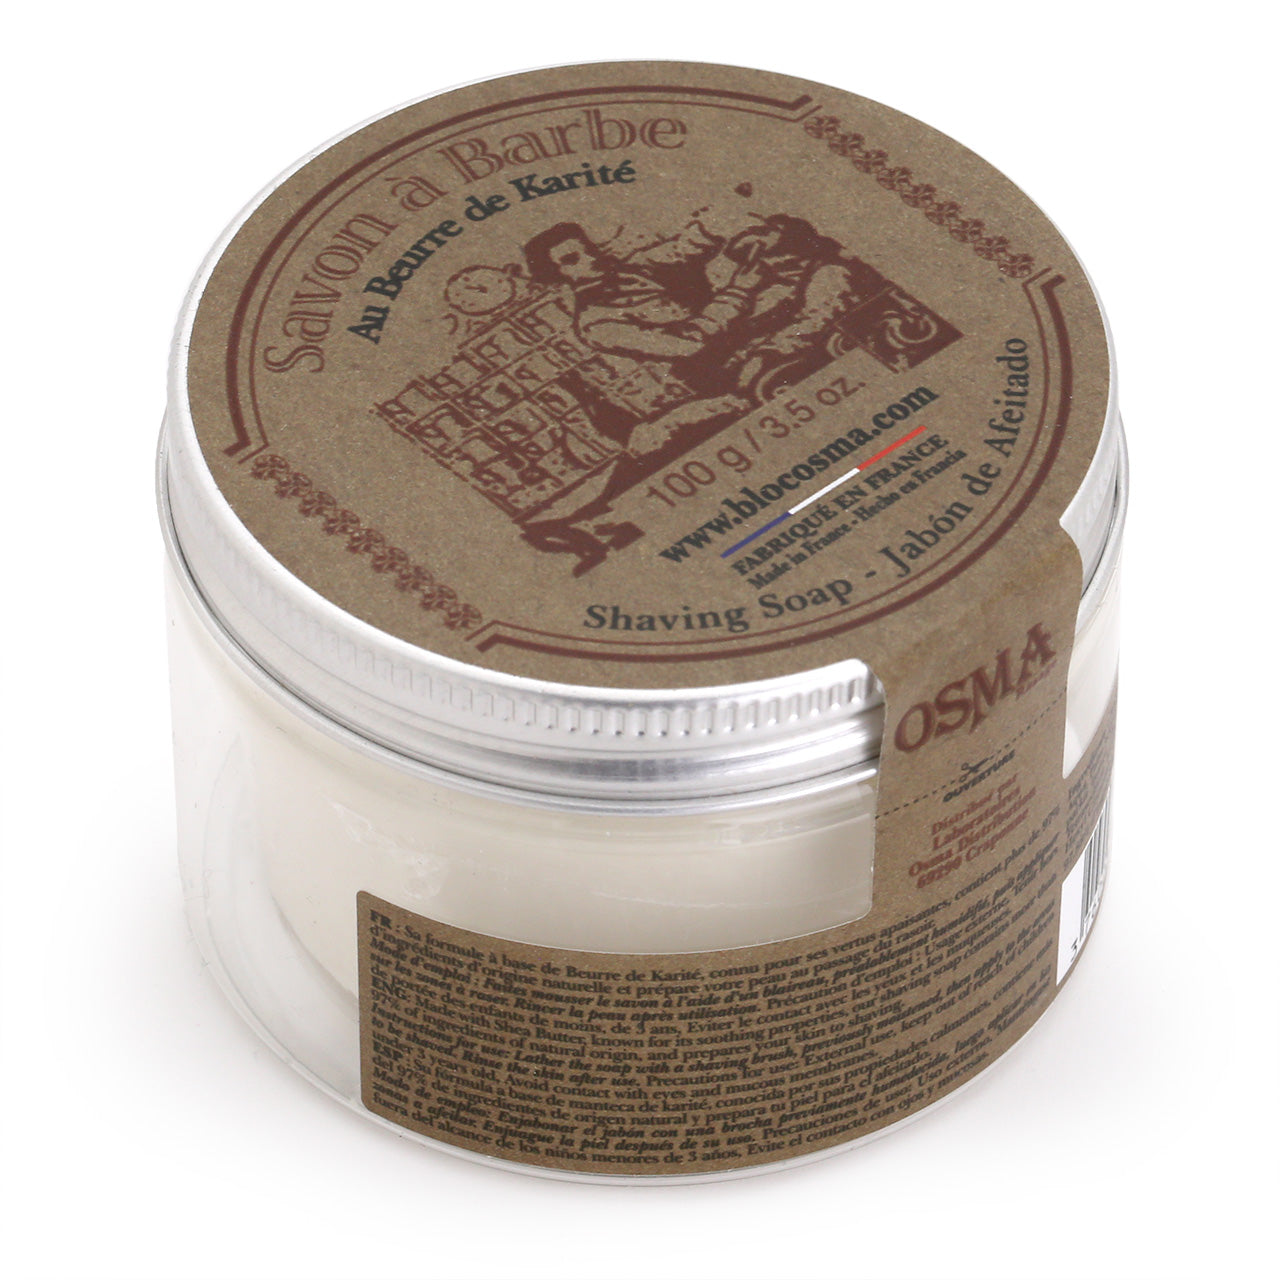 Osma Shave Soap puck with it's screw on lid container